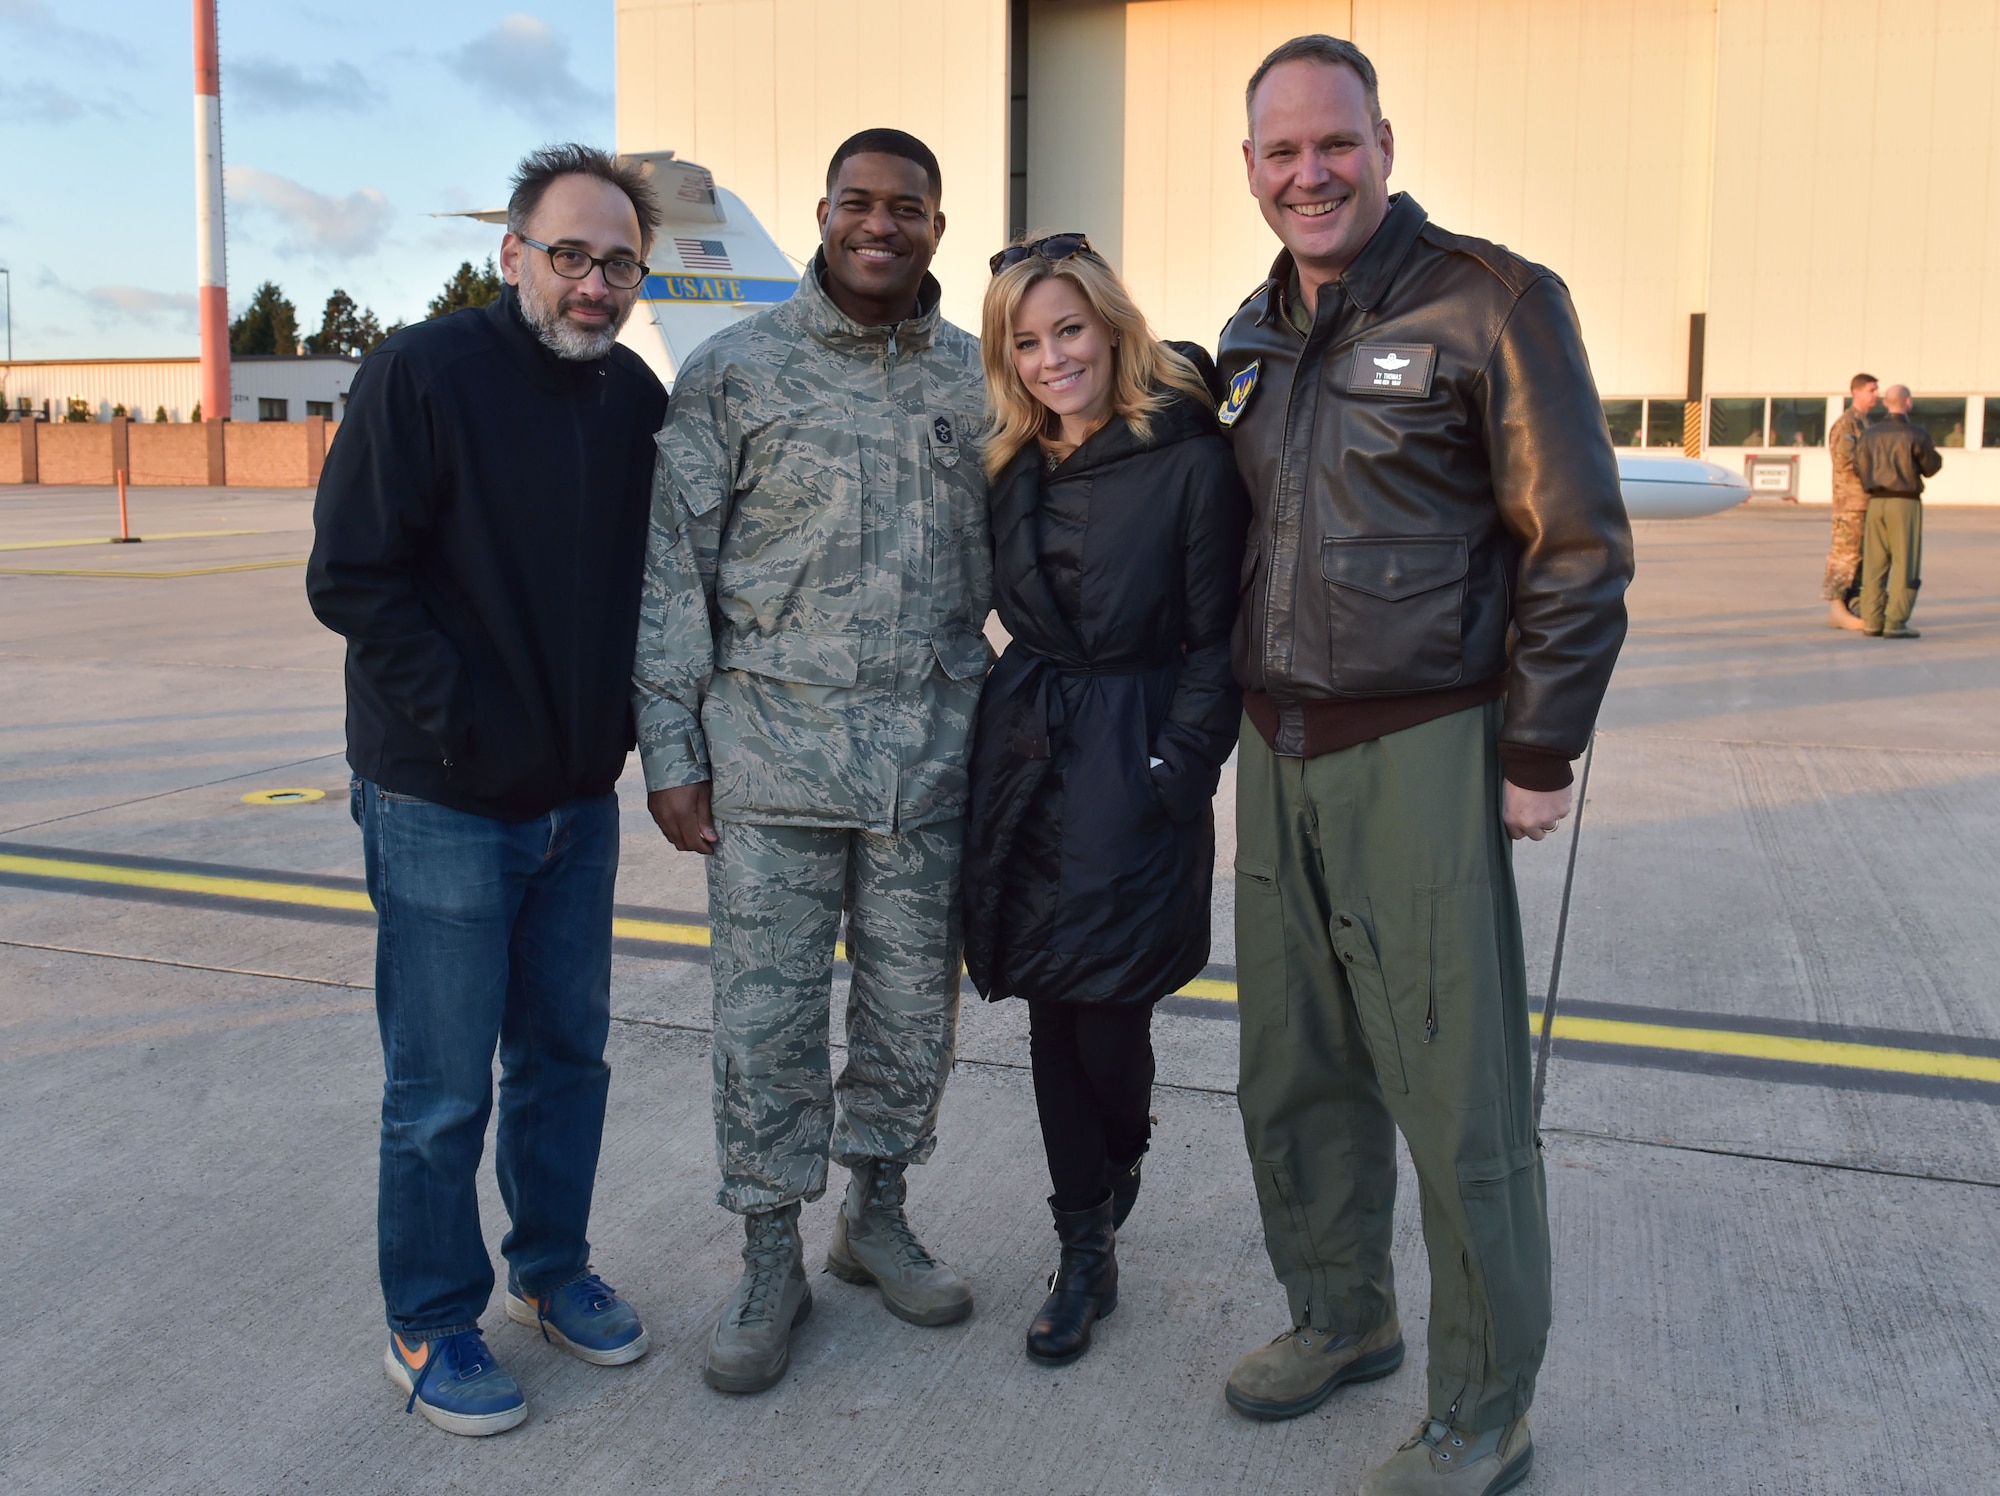 Writer and director David Wain and actress Elizabeth Banks stop for a photo with Brig. Gen. Jon. T. Thomas, 86th Airlift Wing commander, and Chief Master Sgt. Phillip Easton, 86th AW command chief, during the 2015 USO Holiday Troop Tour, Dec. 9, 2015, at Ramstein Air Base, Germany. Thomas welcomed the group of entertainers, as well as the Chairman of the Joint Chiefs of Staff during the performance opening. (U.S. Air Force photo/Staff Sgt. Leslie Keopka)